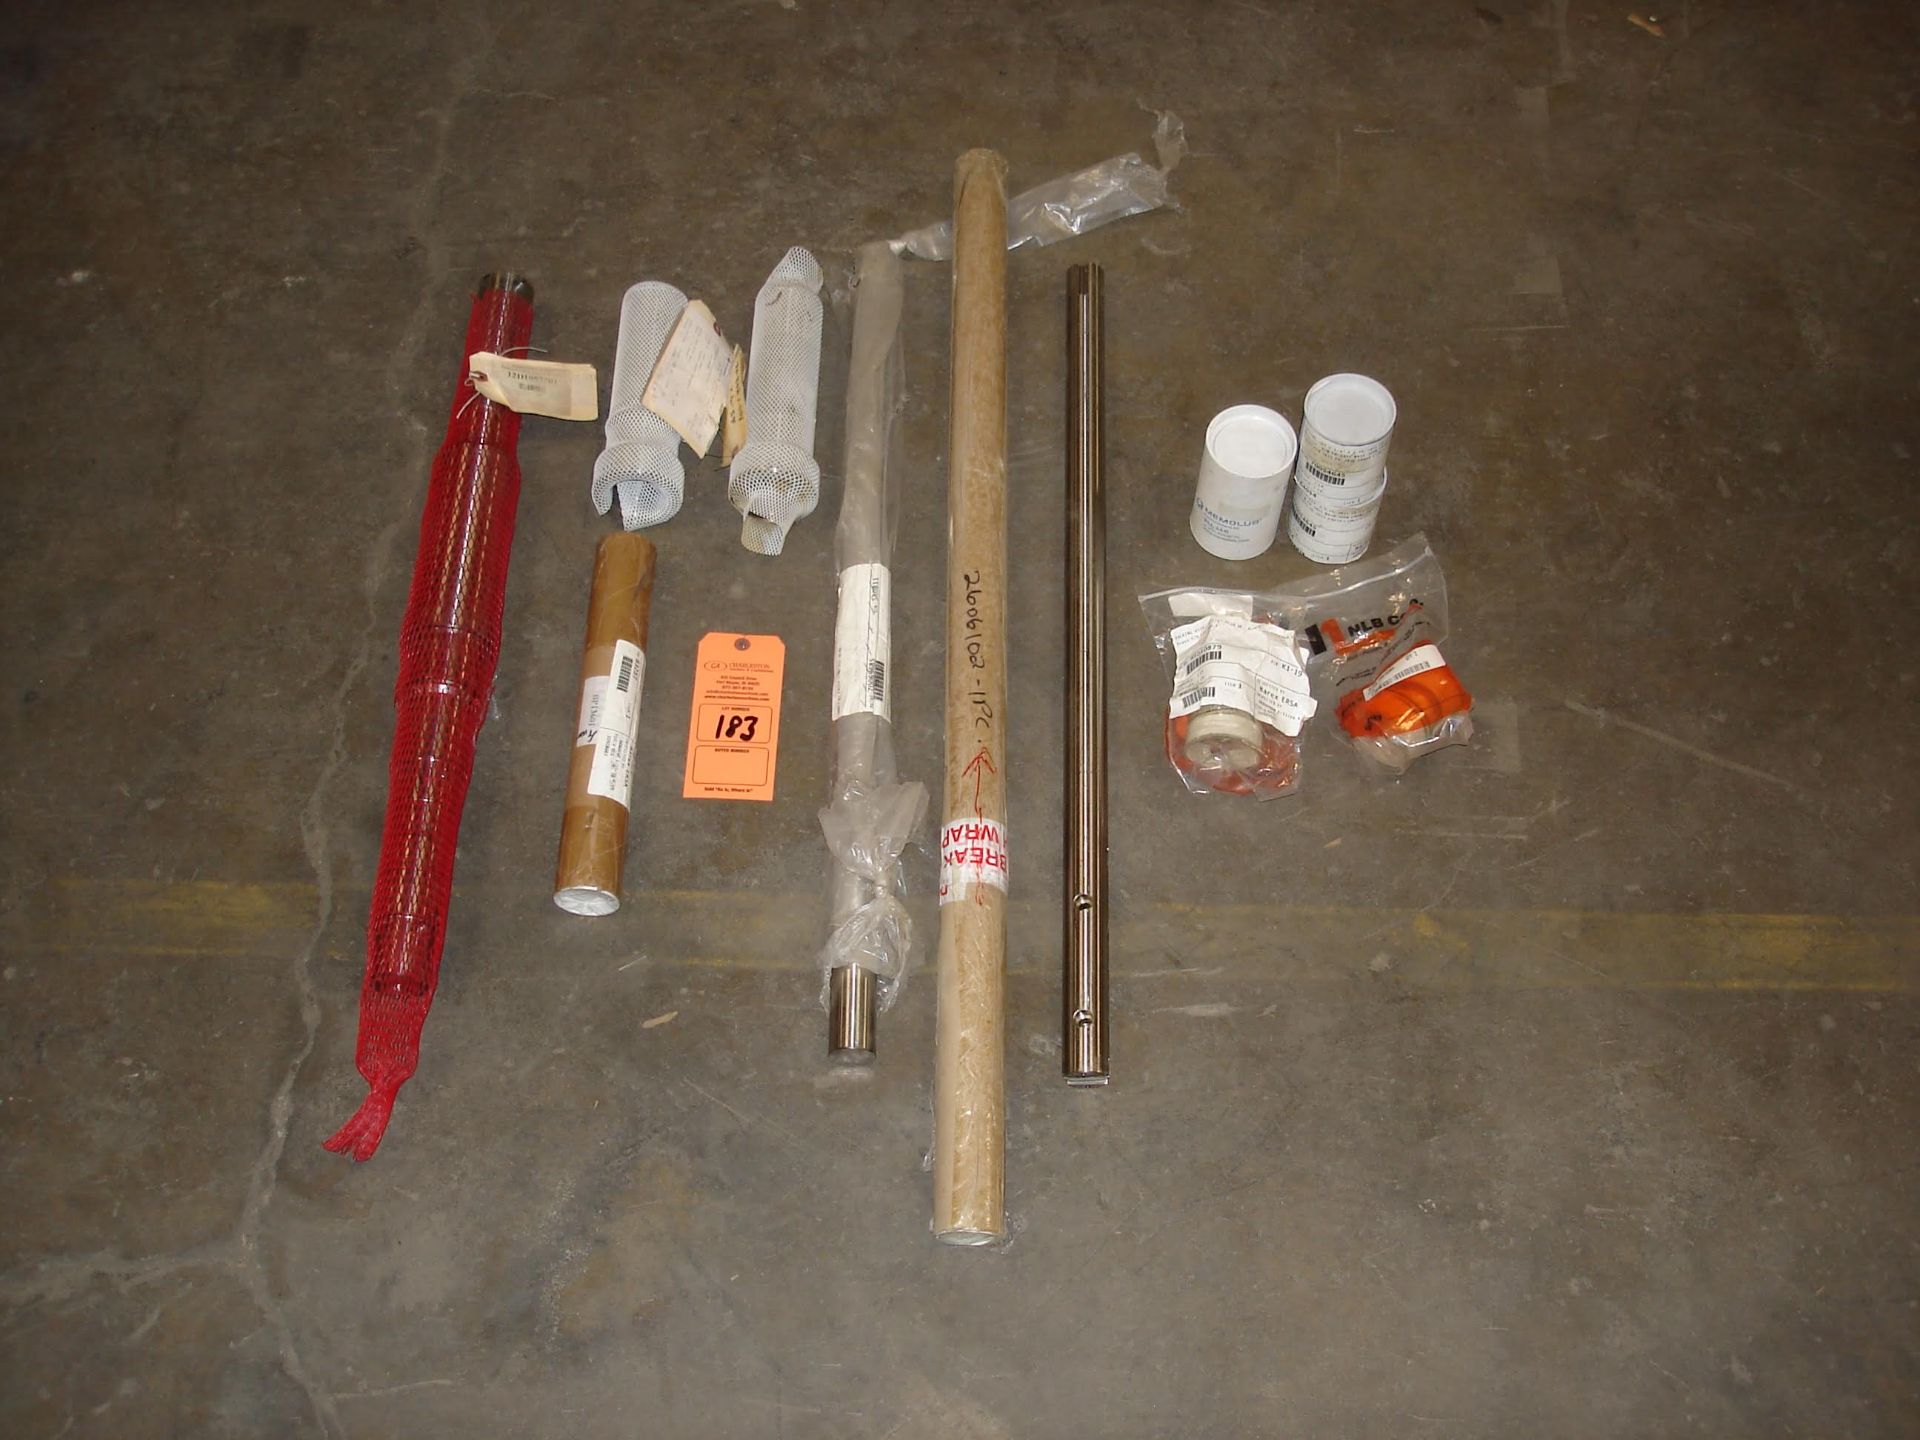 (12) MISC MOTOR SHAFTS AND PACKING SETS: NLB MEMOLUB GOULDS AND ALL OTHER ITEMS INCLUDED IN PHOTOS!